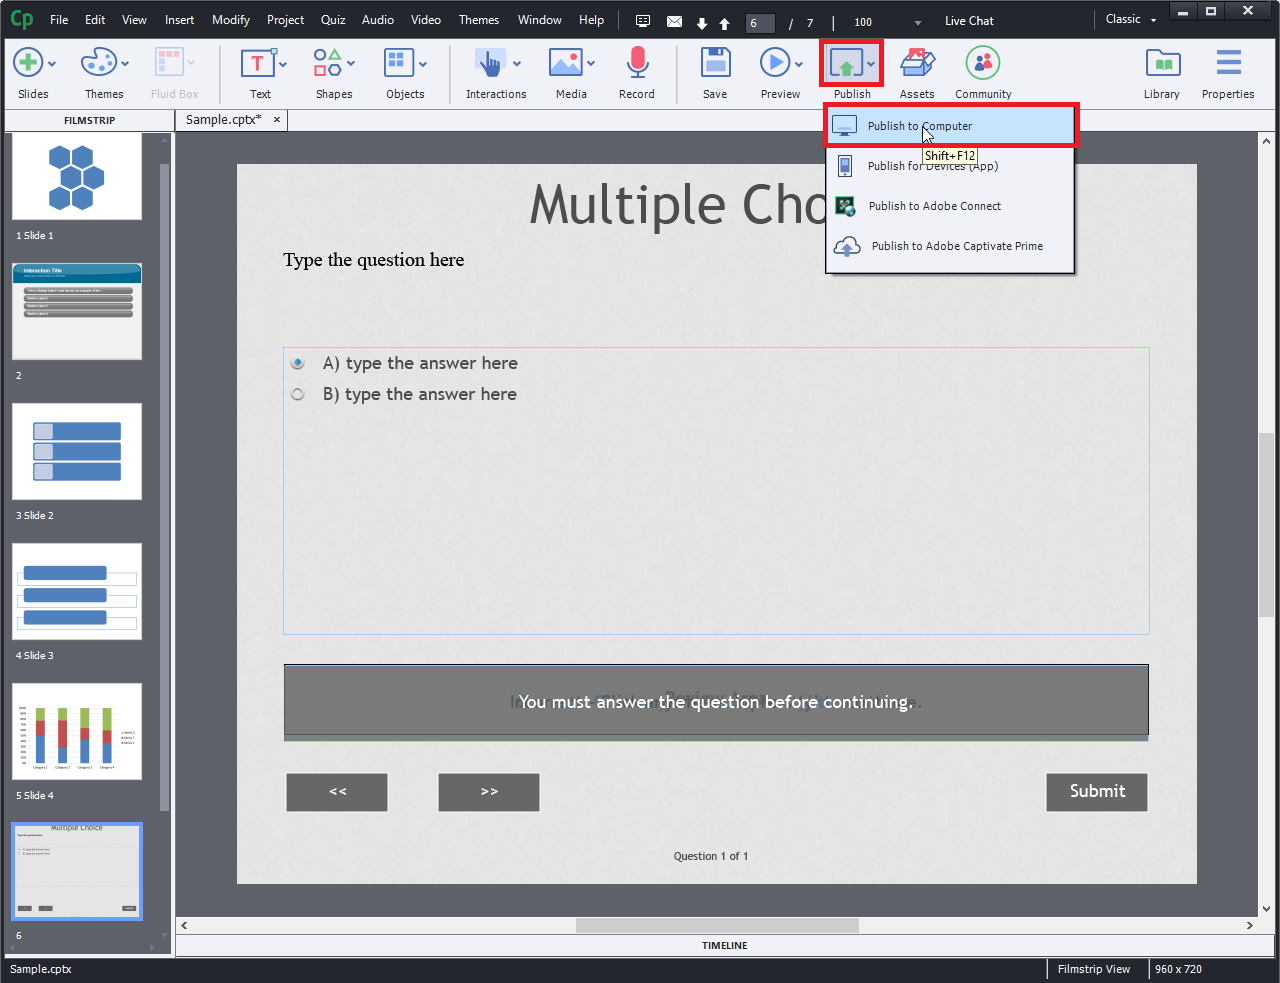 Convert PPT to eLearning Using Adobe Captivate